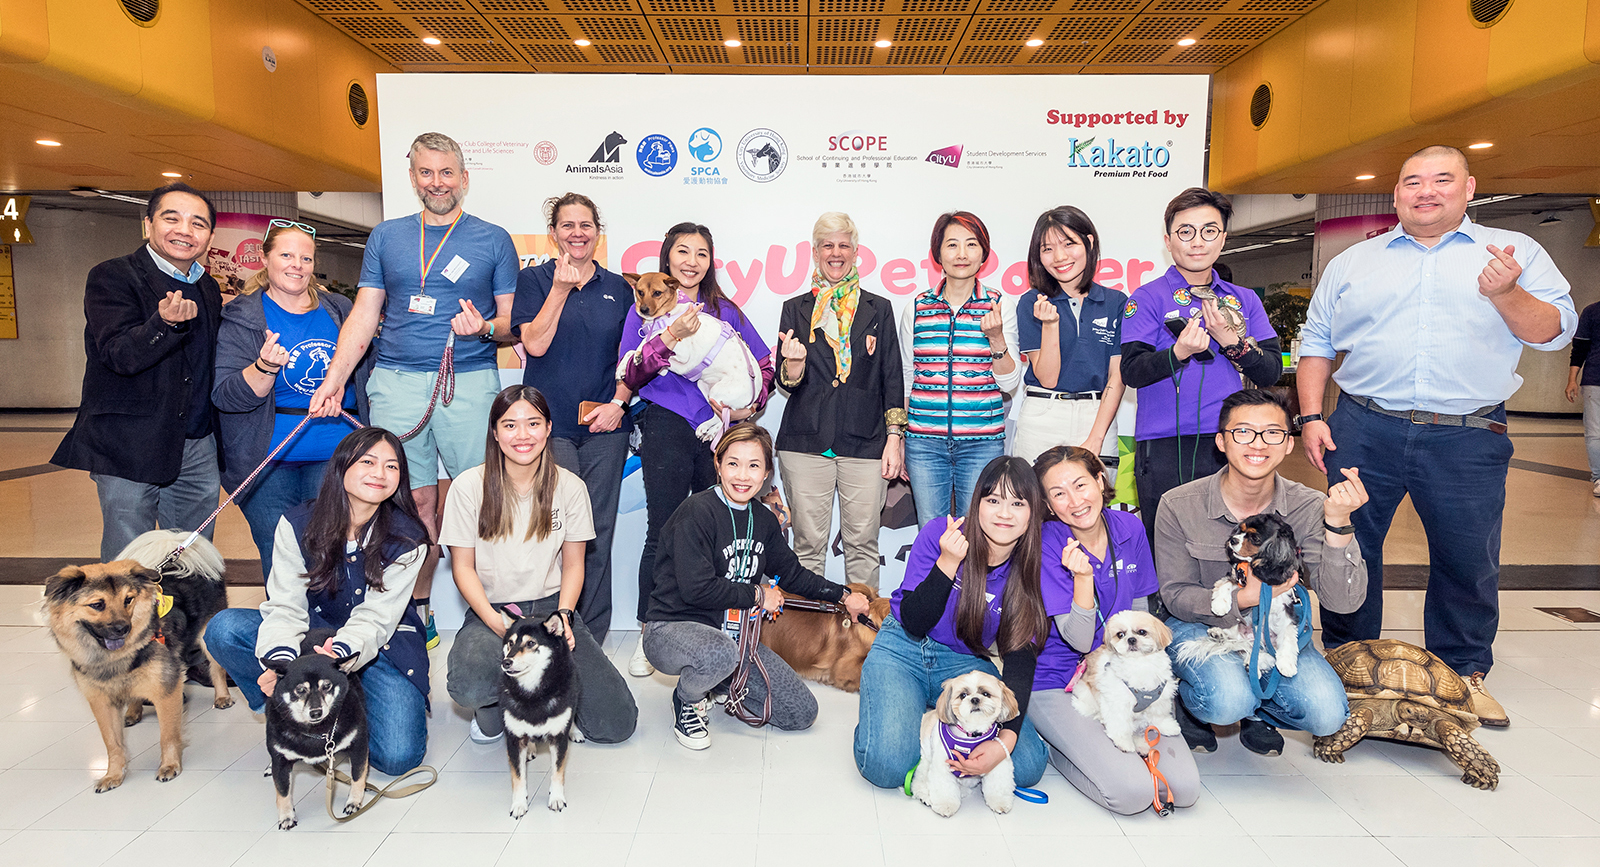 Faculty members and students, along with their pets, and representatives of the collaborating and supporting organisations attend the CityUHK PetPower event.